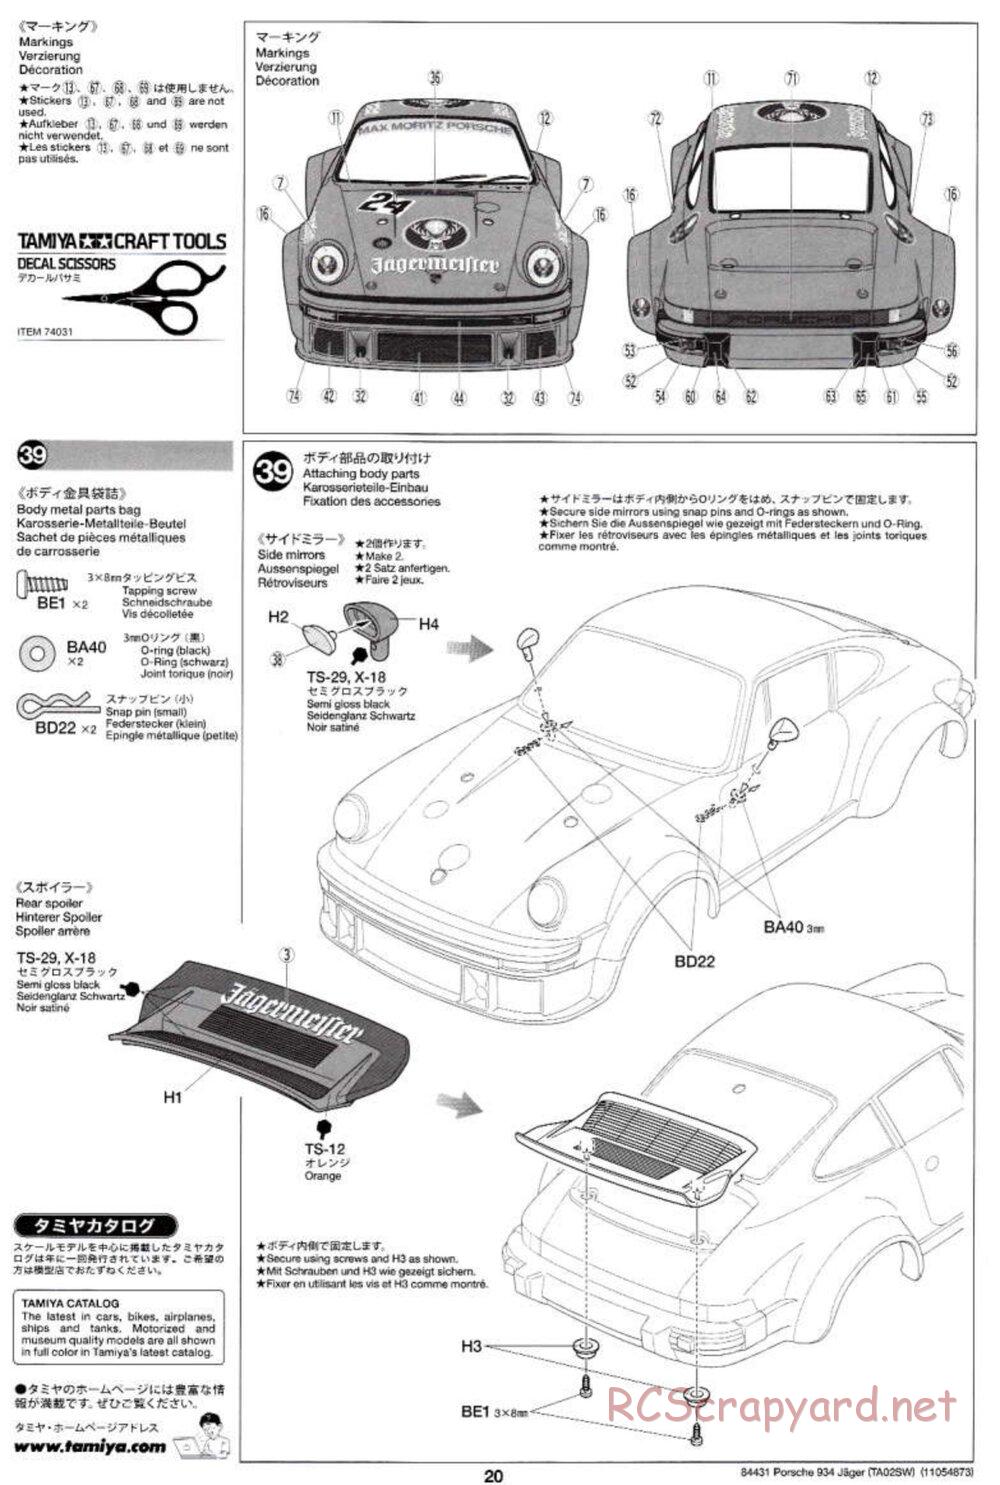 Tamiya - Porsche Turbo RSR Type 934 Jagermeister - TA-02SW Chassis - Manual - Page 20